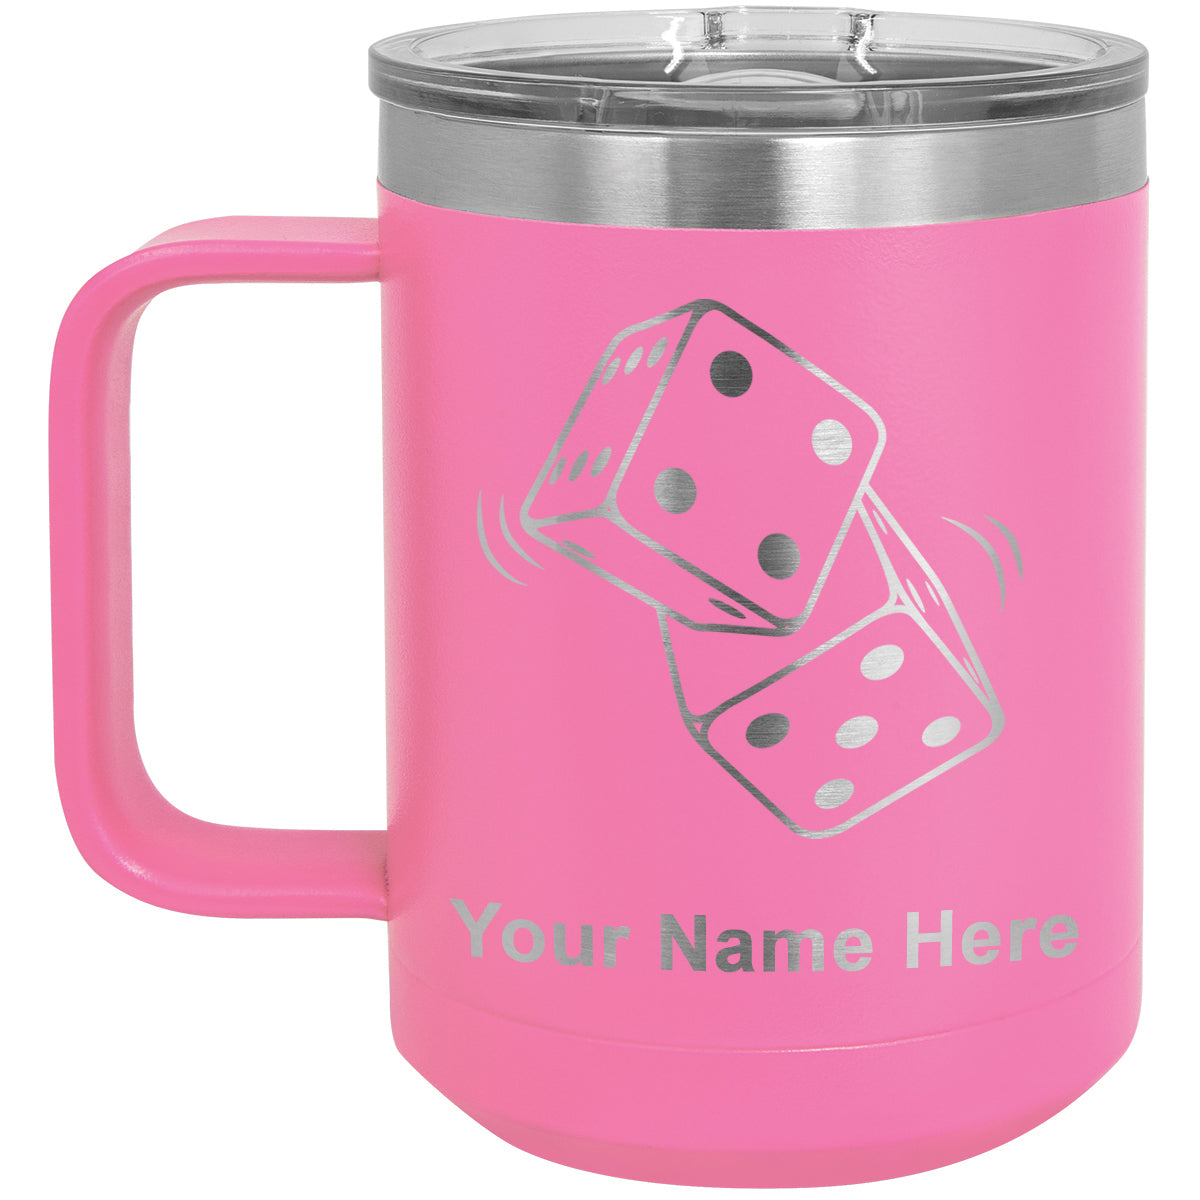 15oz Vacuum Insulated Coffee Mug, Pair of Dice, Personalized Engraving Included